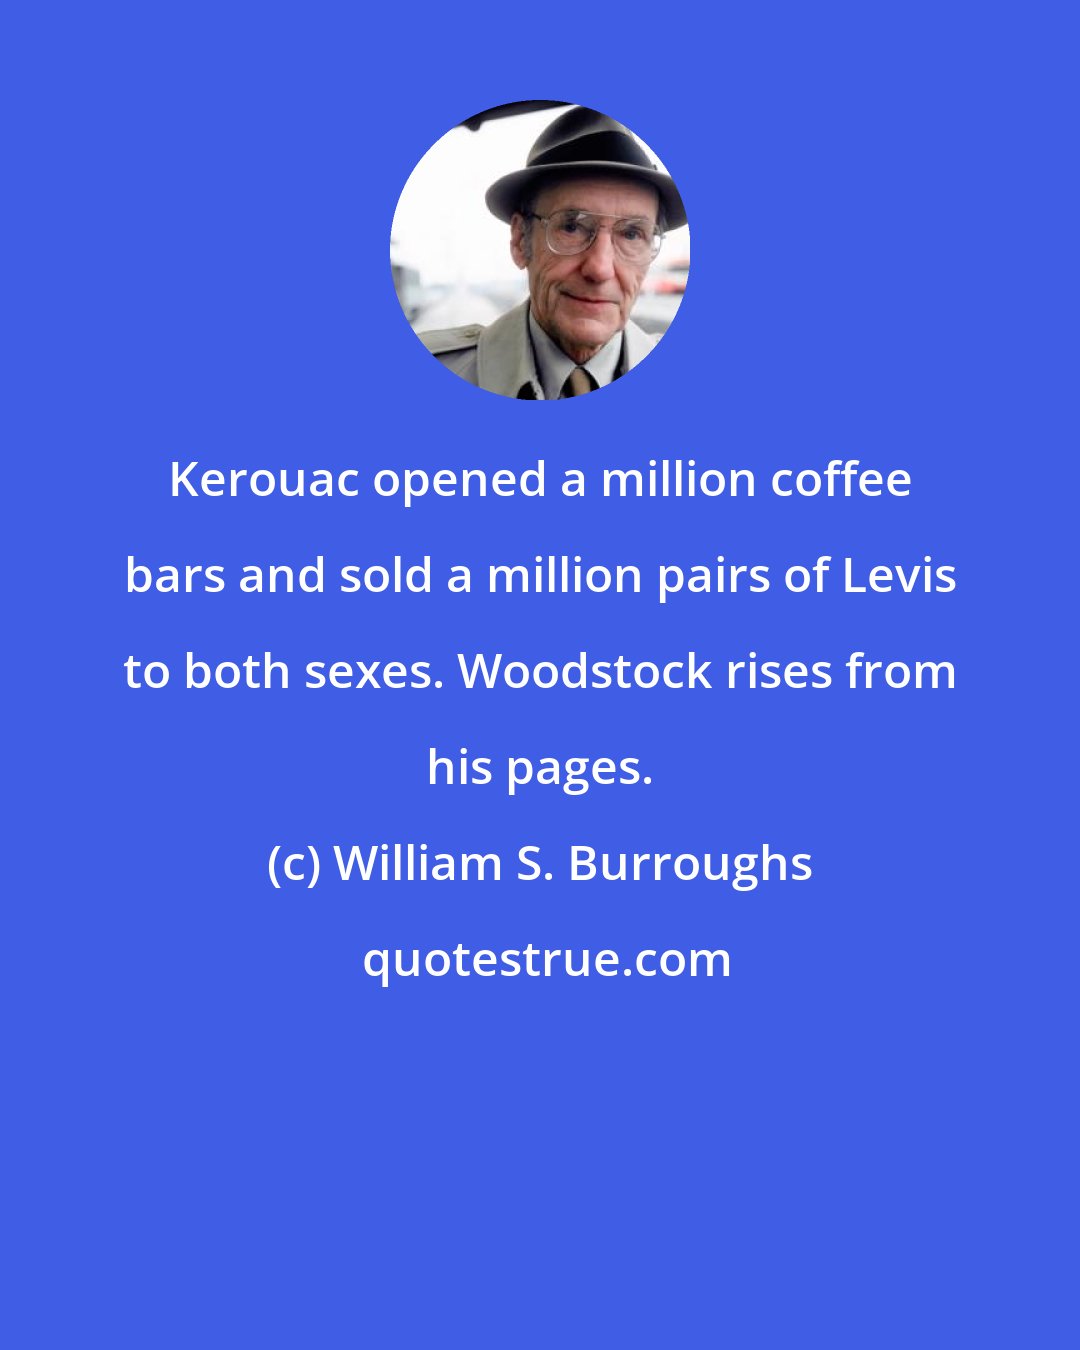 William S. Burroughs: Kerouac opened a million coffee bars and sold a million pairs of Levis to both sexes. Woodstock rises from his pages.